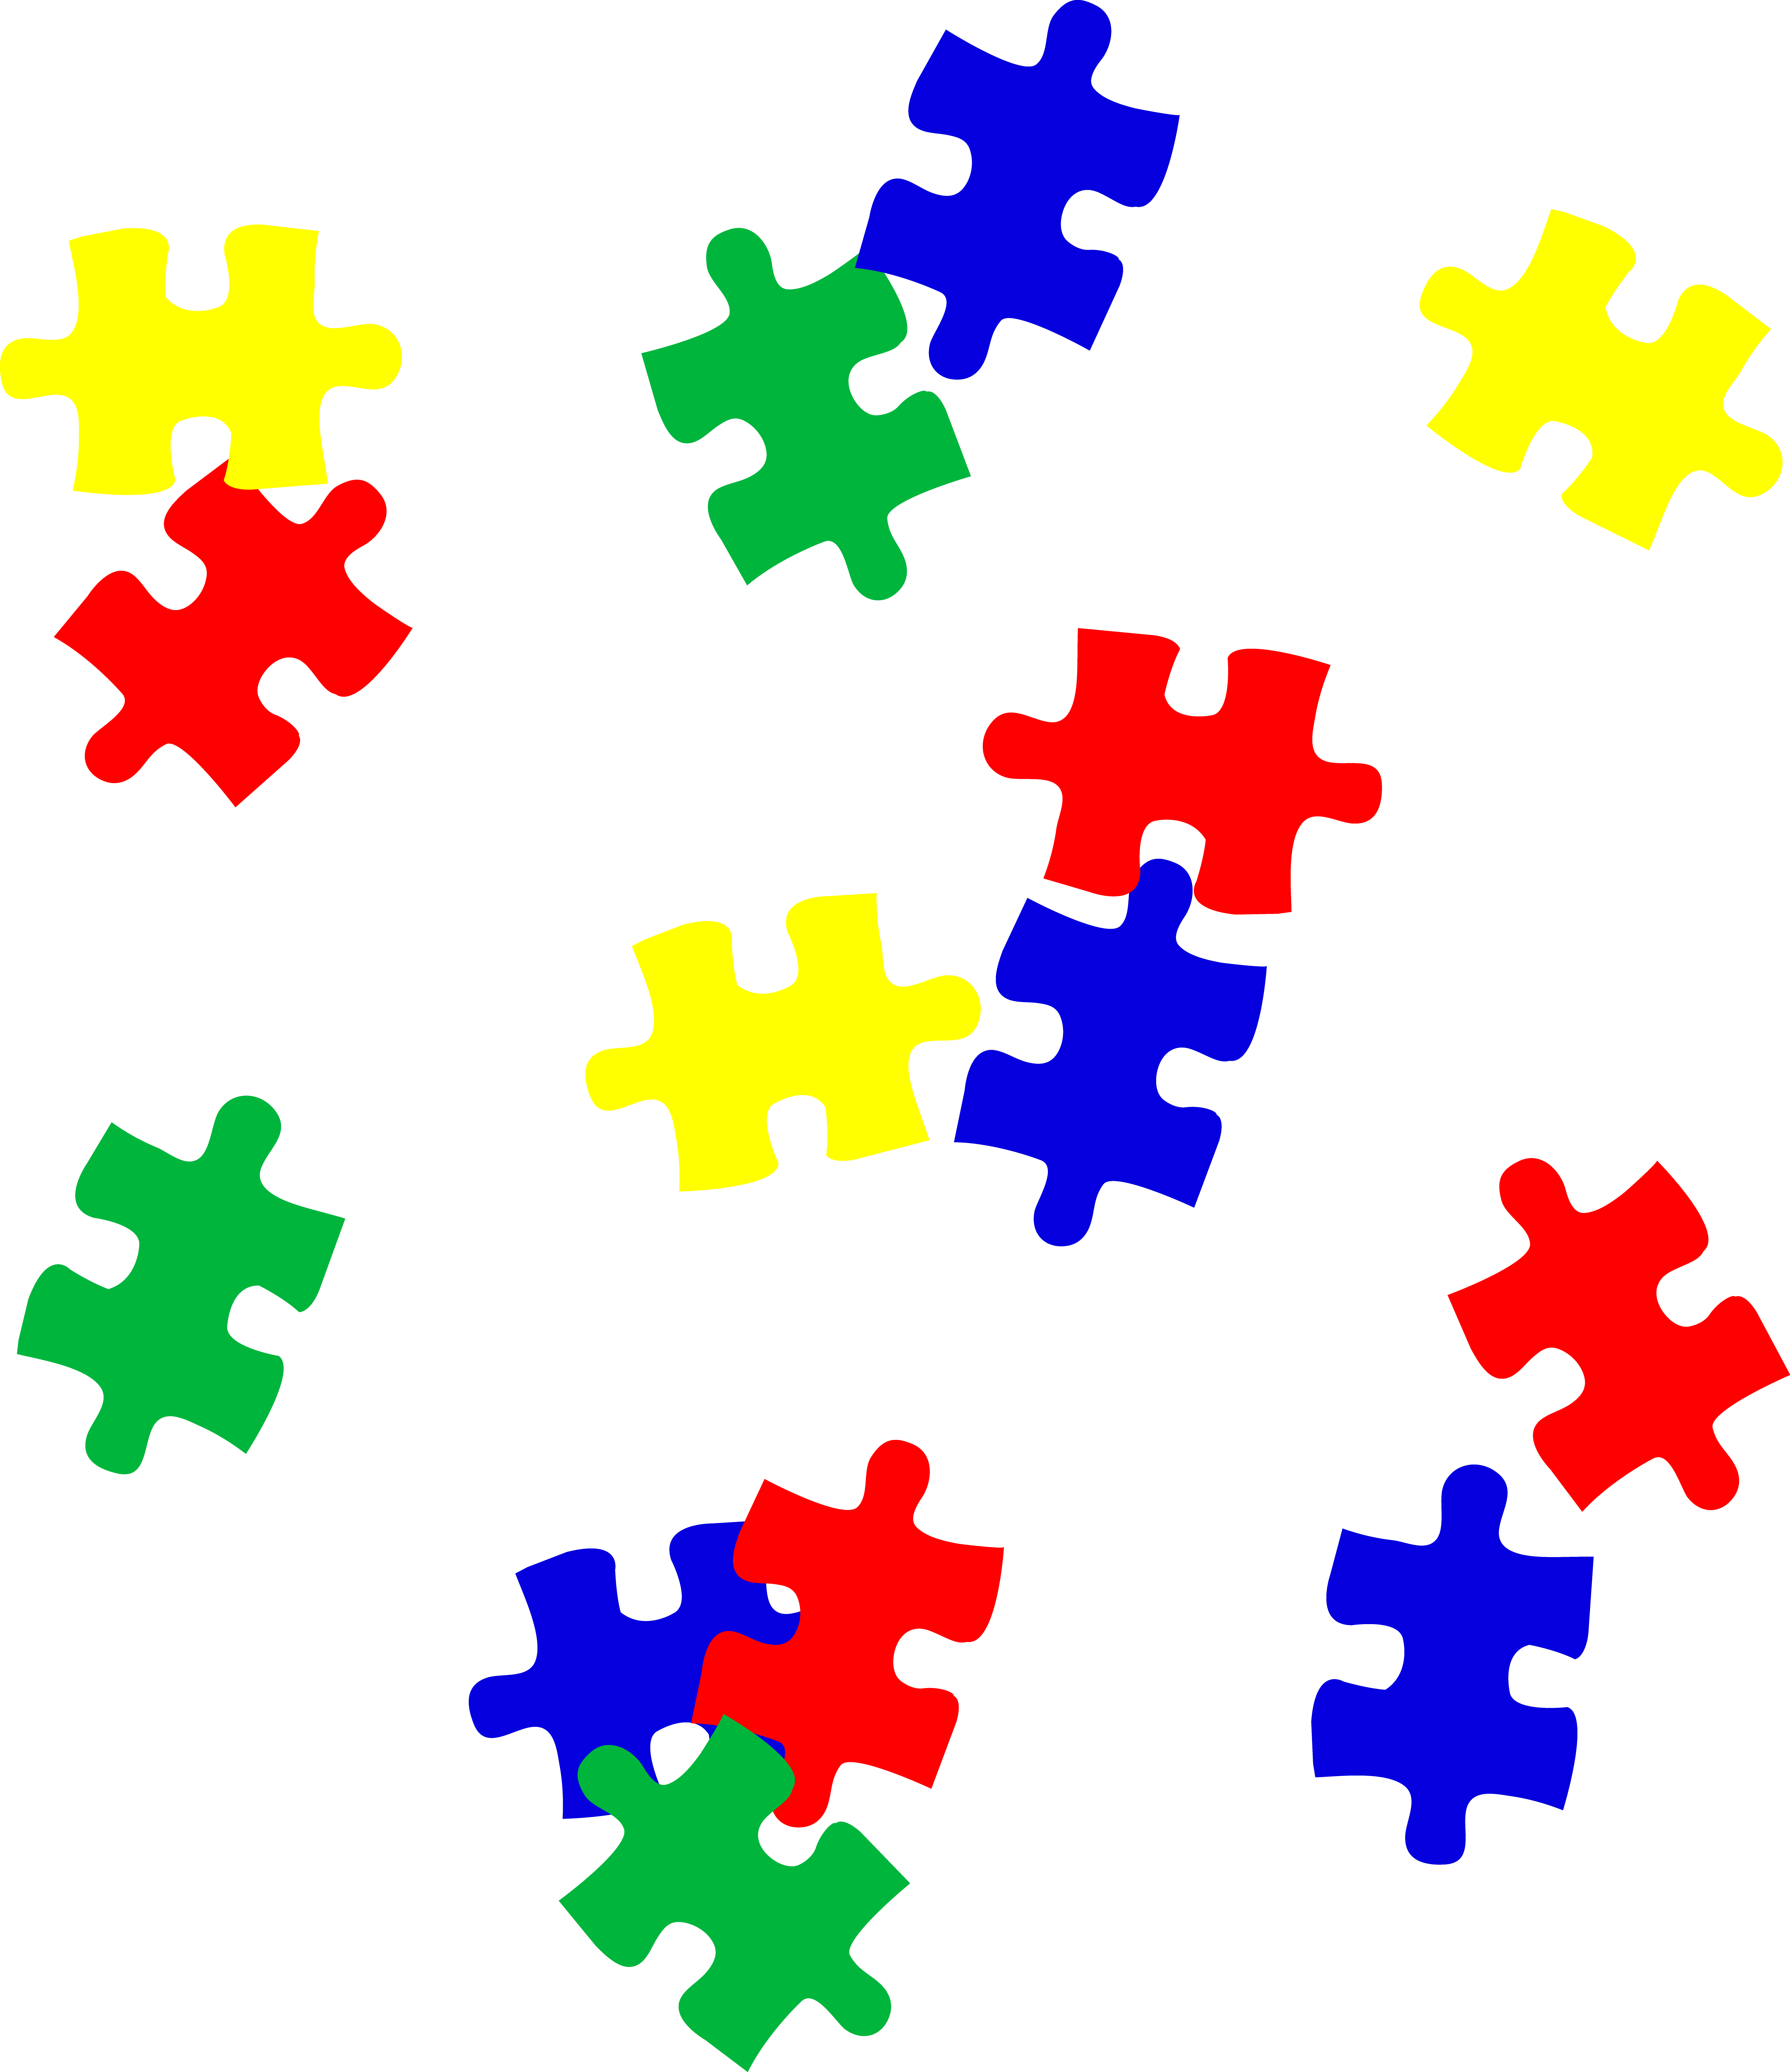 Rainbow Scattered Kids Puzzle Pieces - Free Clip Art